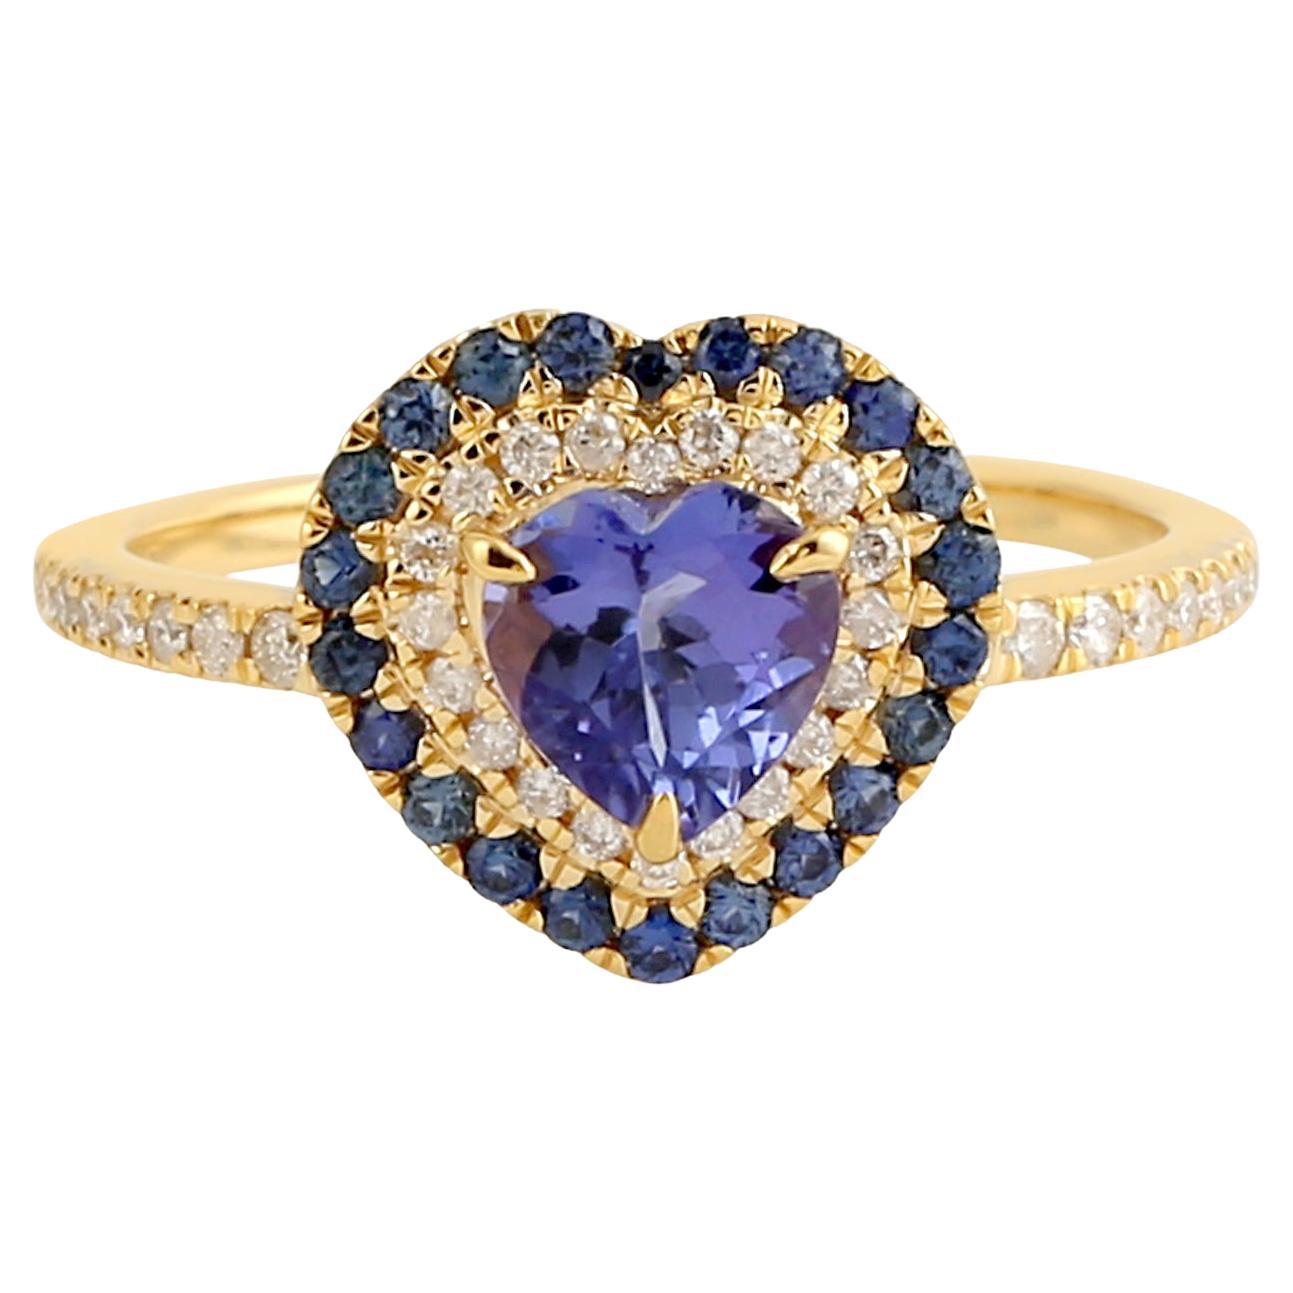 Heart Shaped Tanzanite Ring With Sapphire & Diamonds Made In 18k Yellow Gold